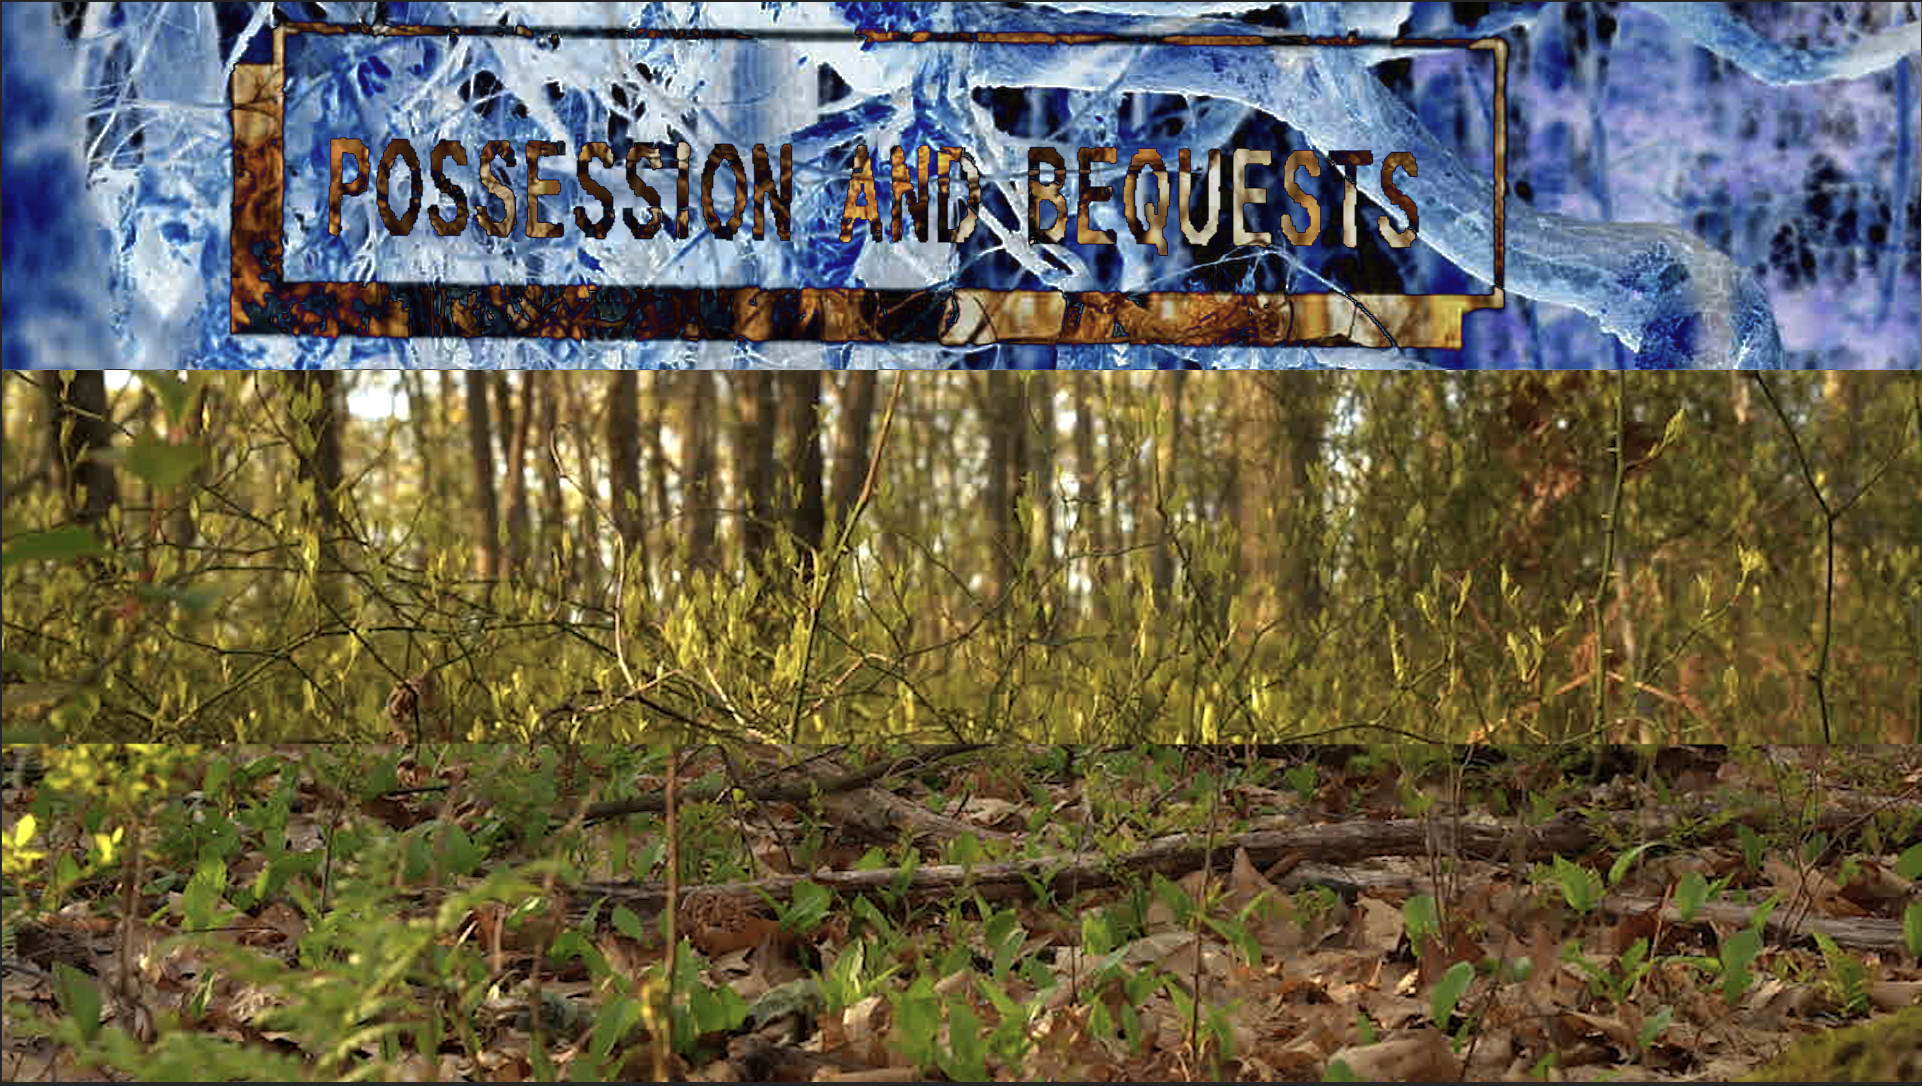 Split-screen image offforest floor with overlay text in negative reading "possession and bequests"